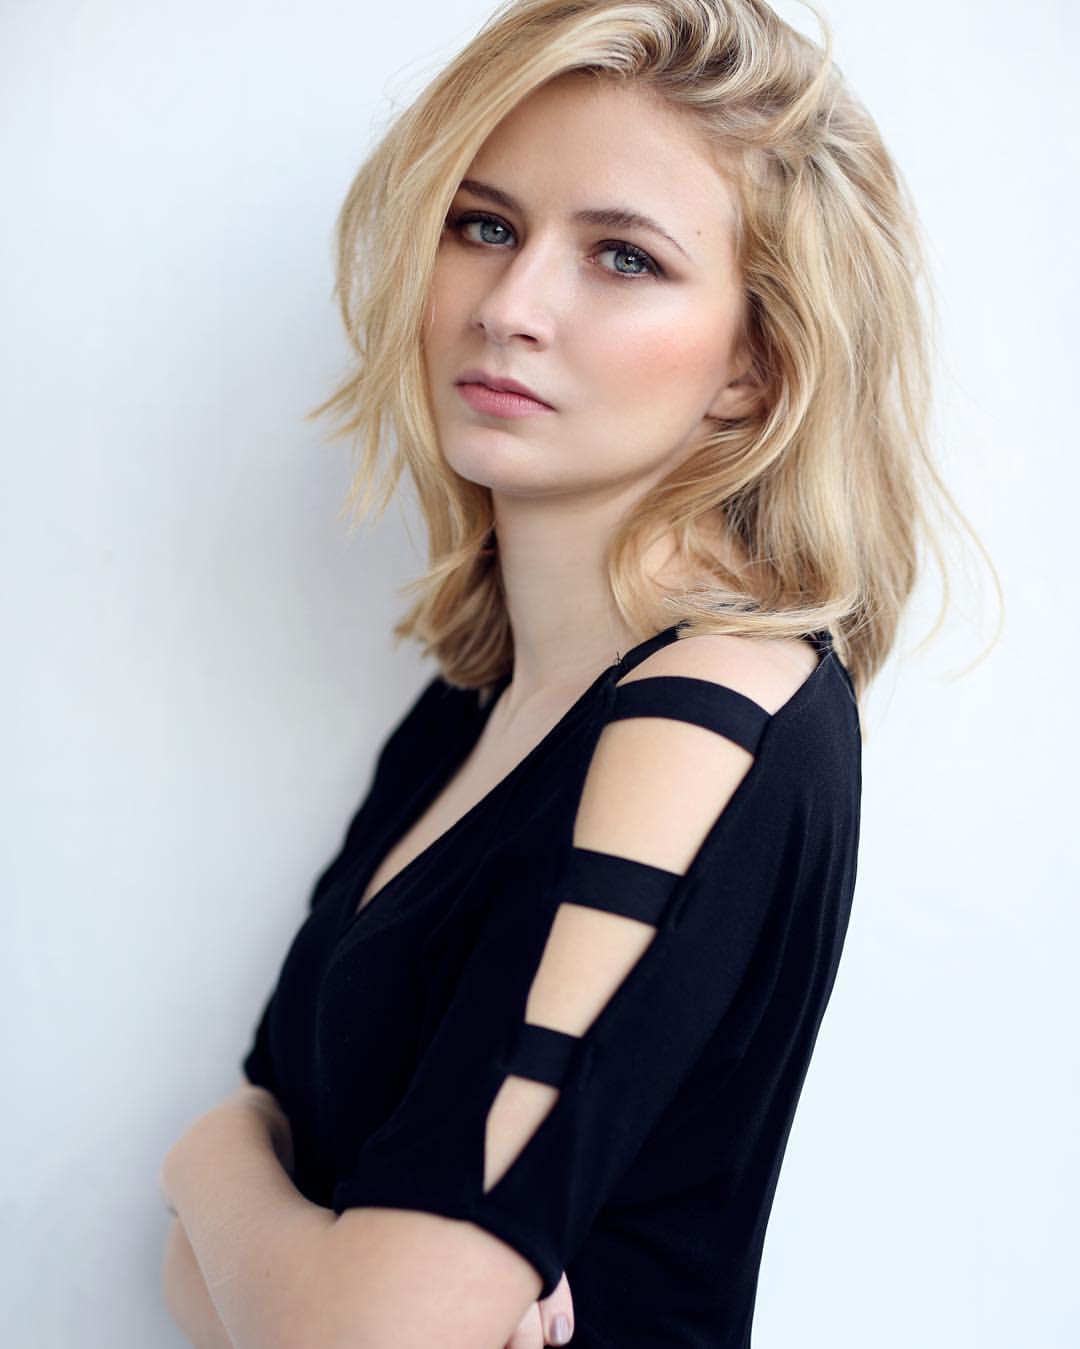 49 Hot Pictures Of Eliza Bennett Which Are Sure to Catch Your Attention | Best Of Comic Books